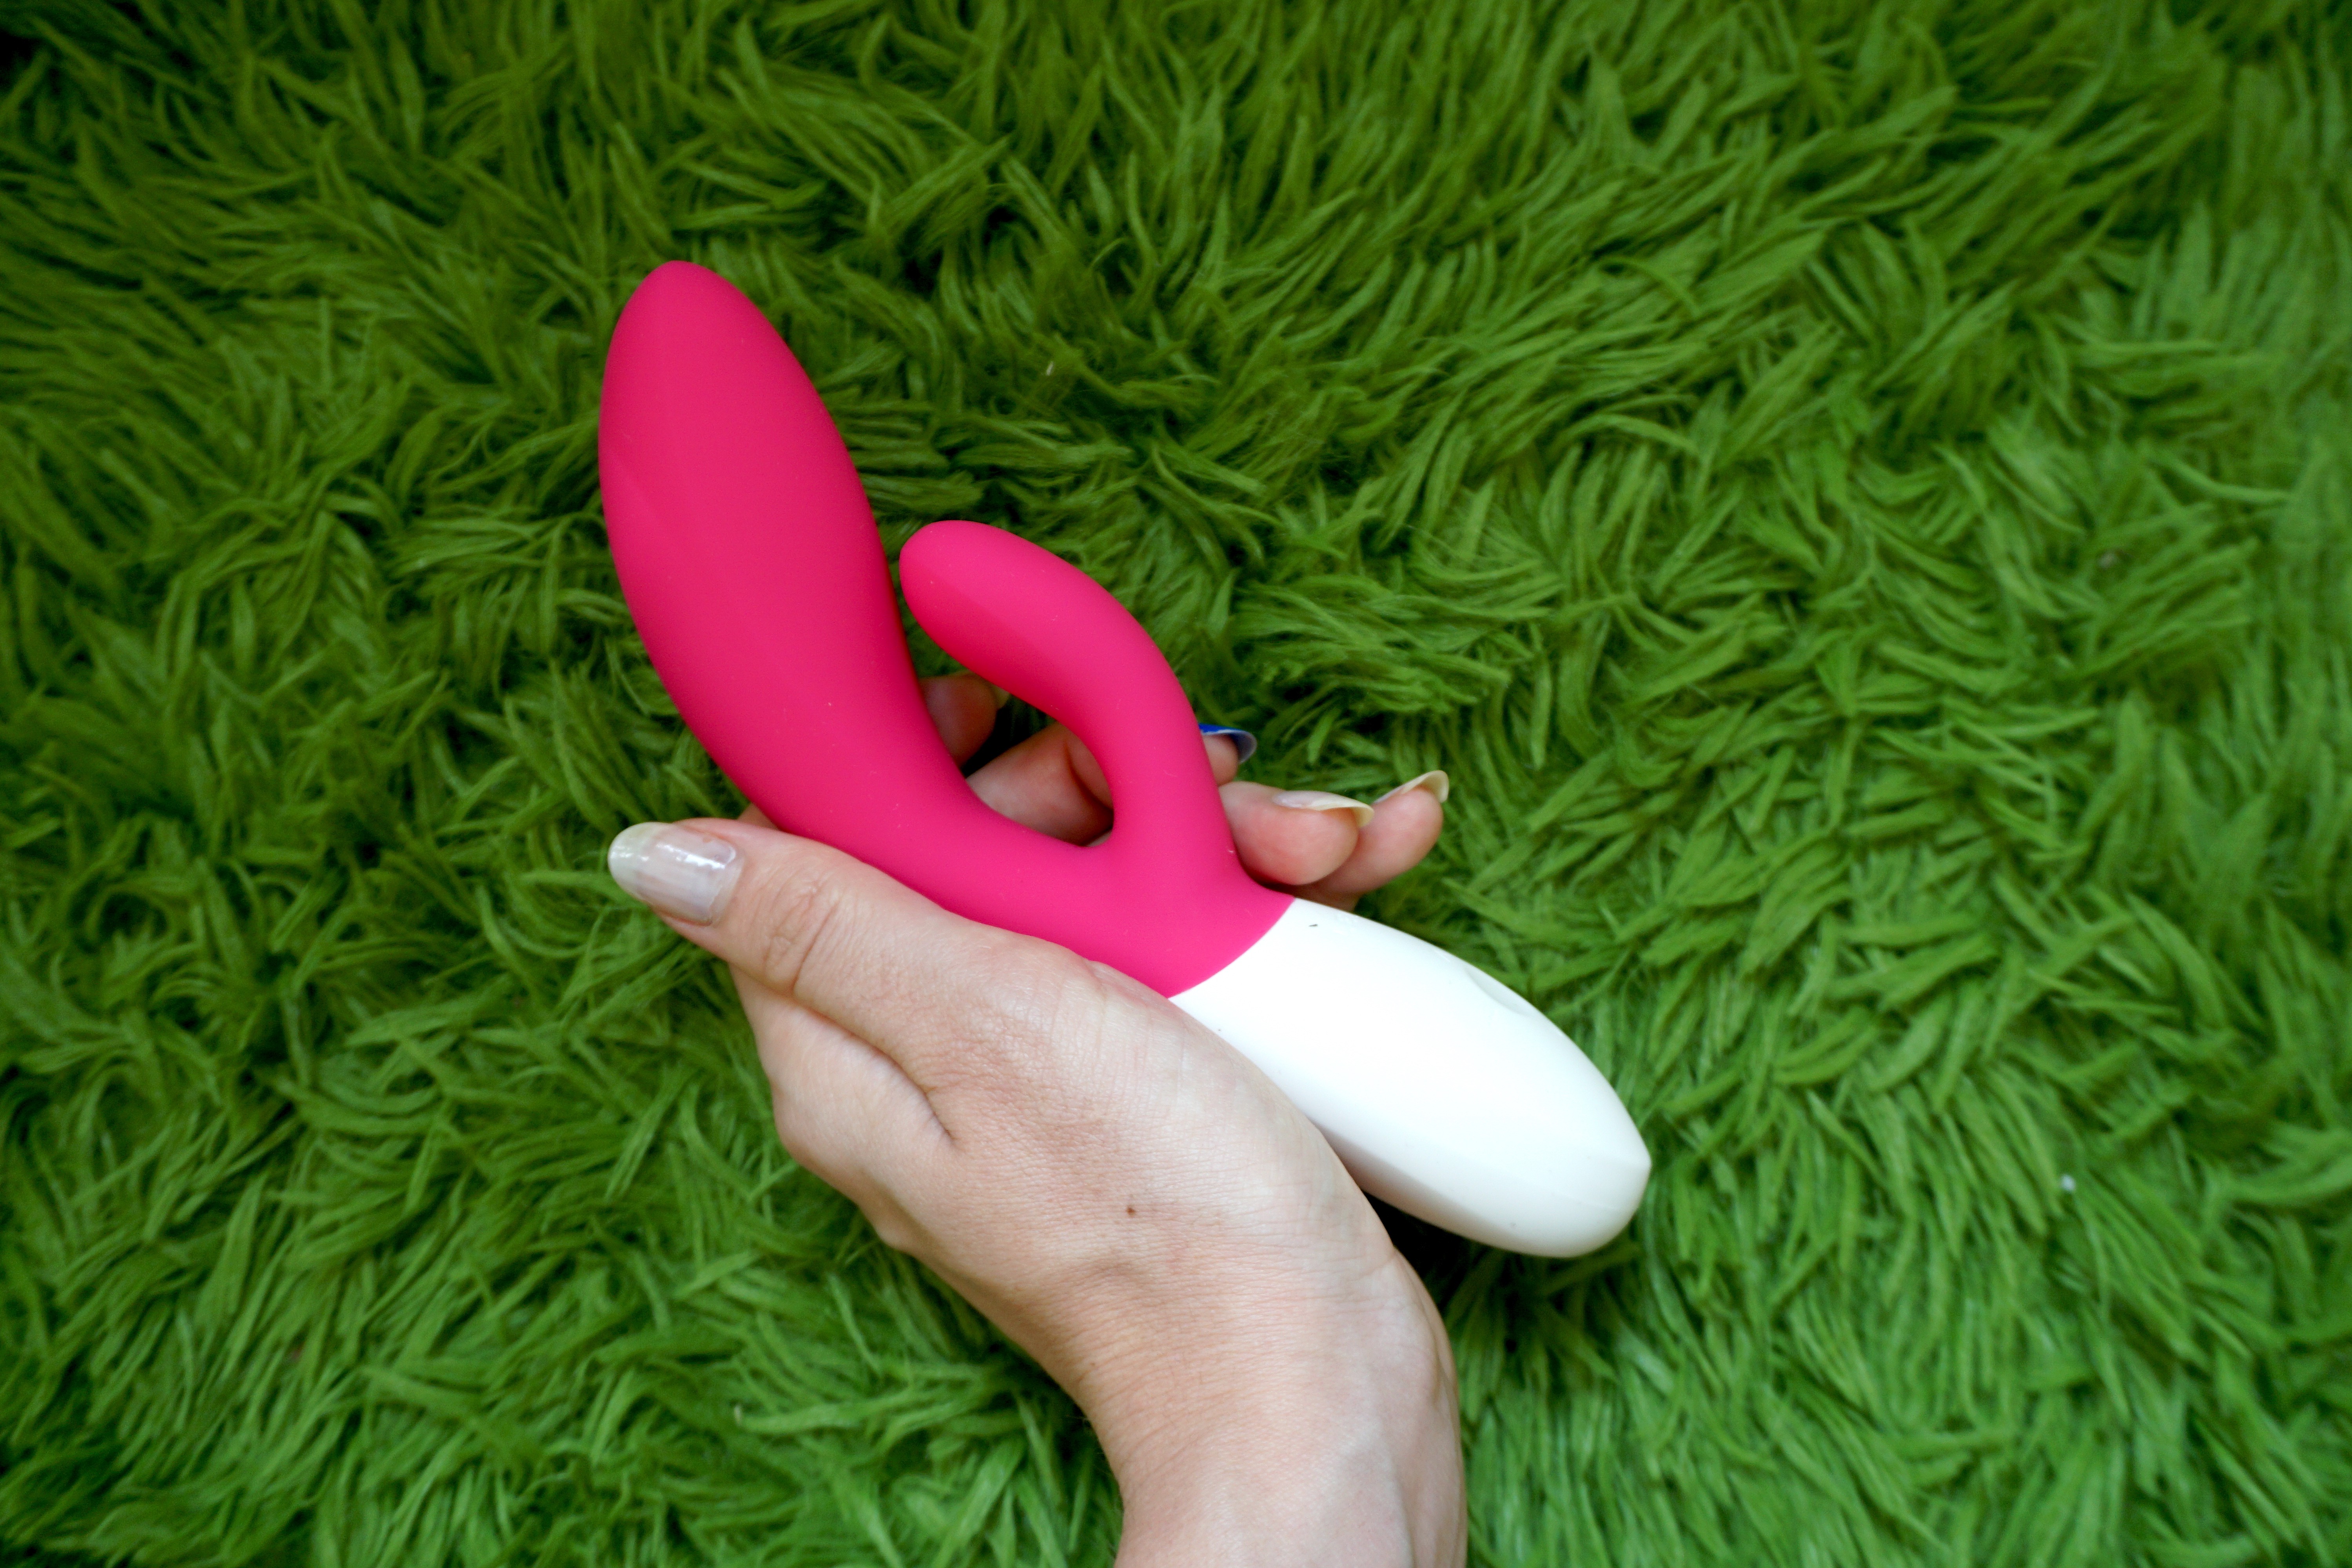 Review: The Zumio X sex toy